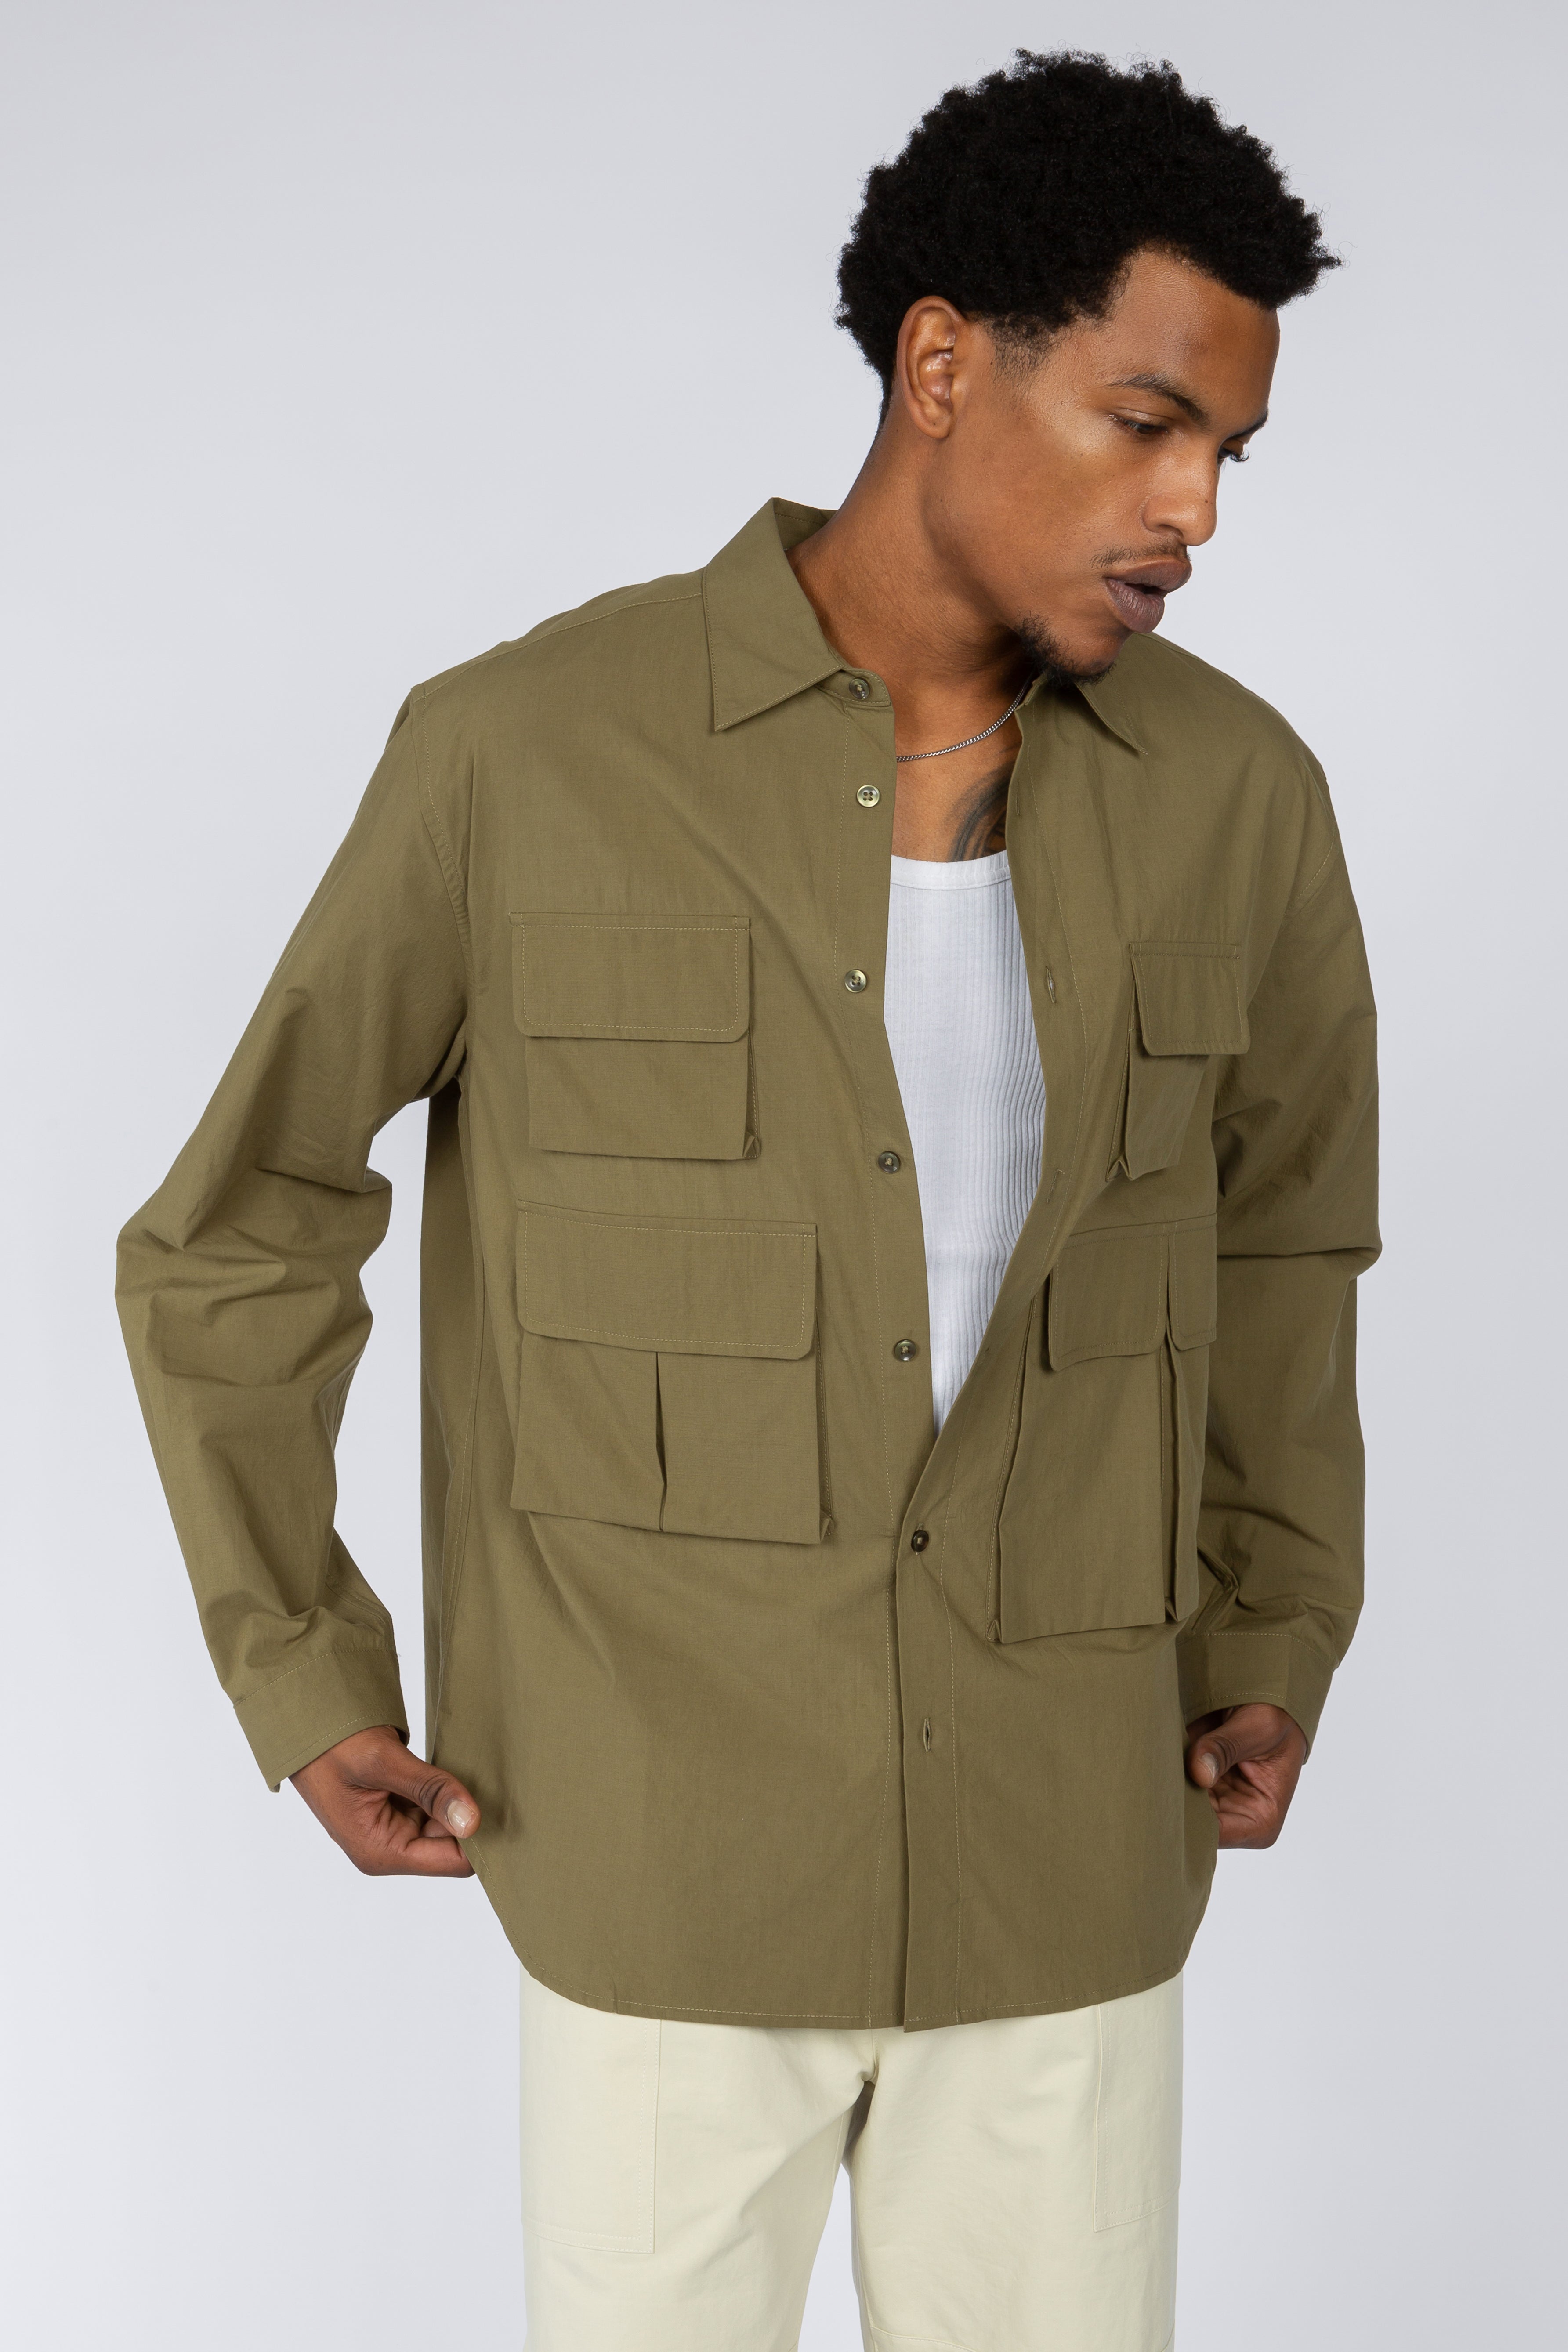 Multi-Pocket Utility Shirt - Olive Ripstop – SHADES OF GREY BY